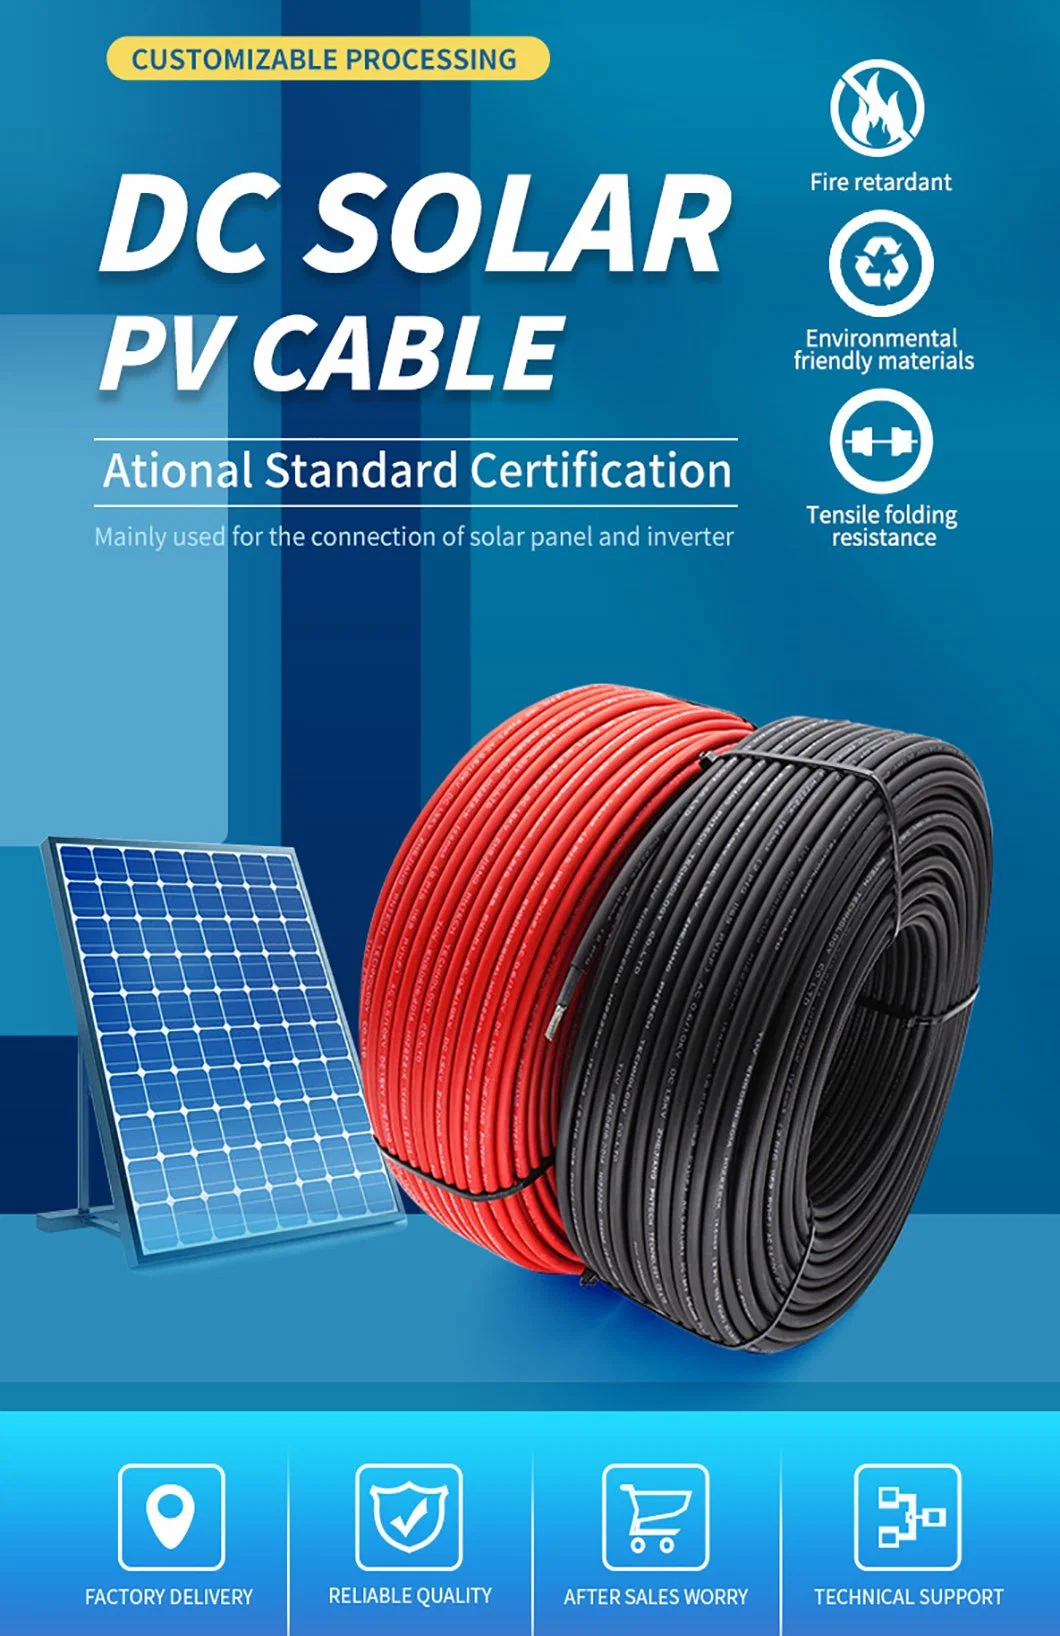 Double Protect DC Single Core PV1-F 1X2.5mm2 Photovoltaic Solar Cable Electric Wire Solar Cable